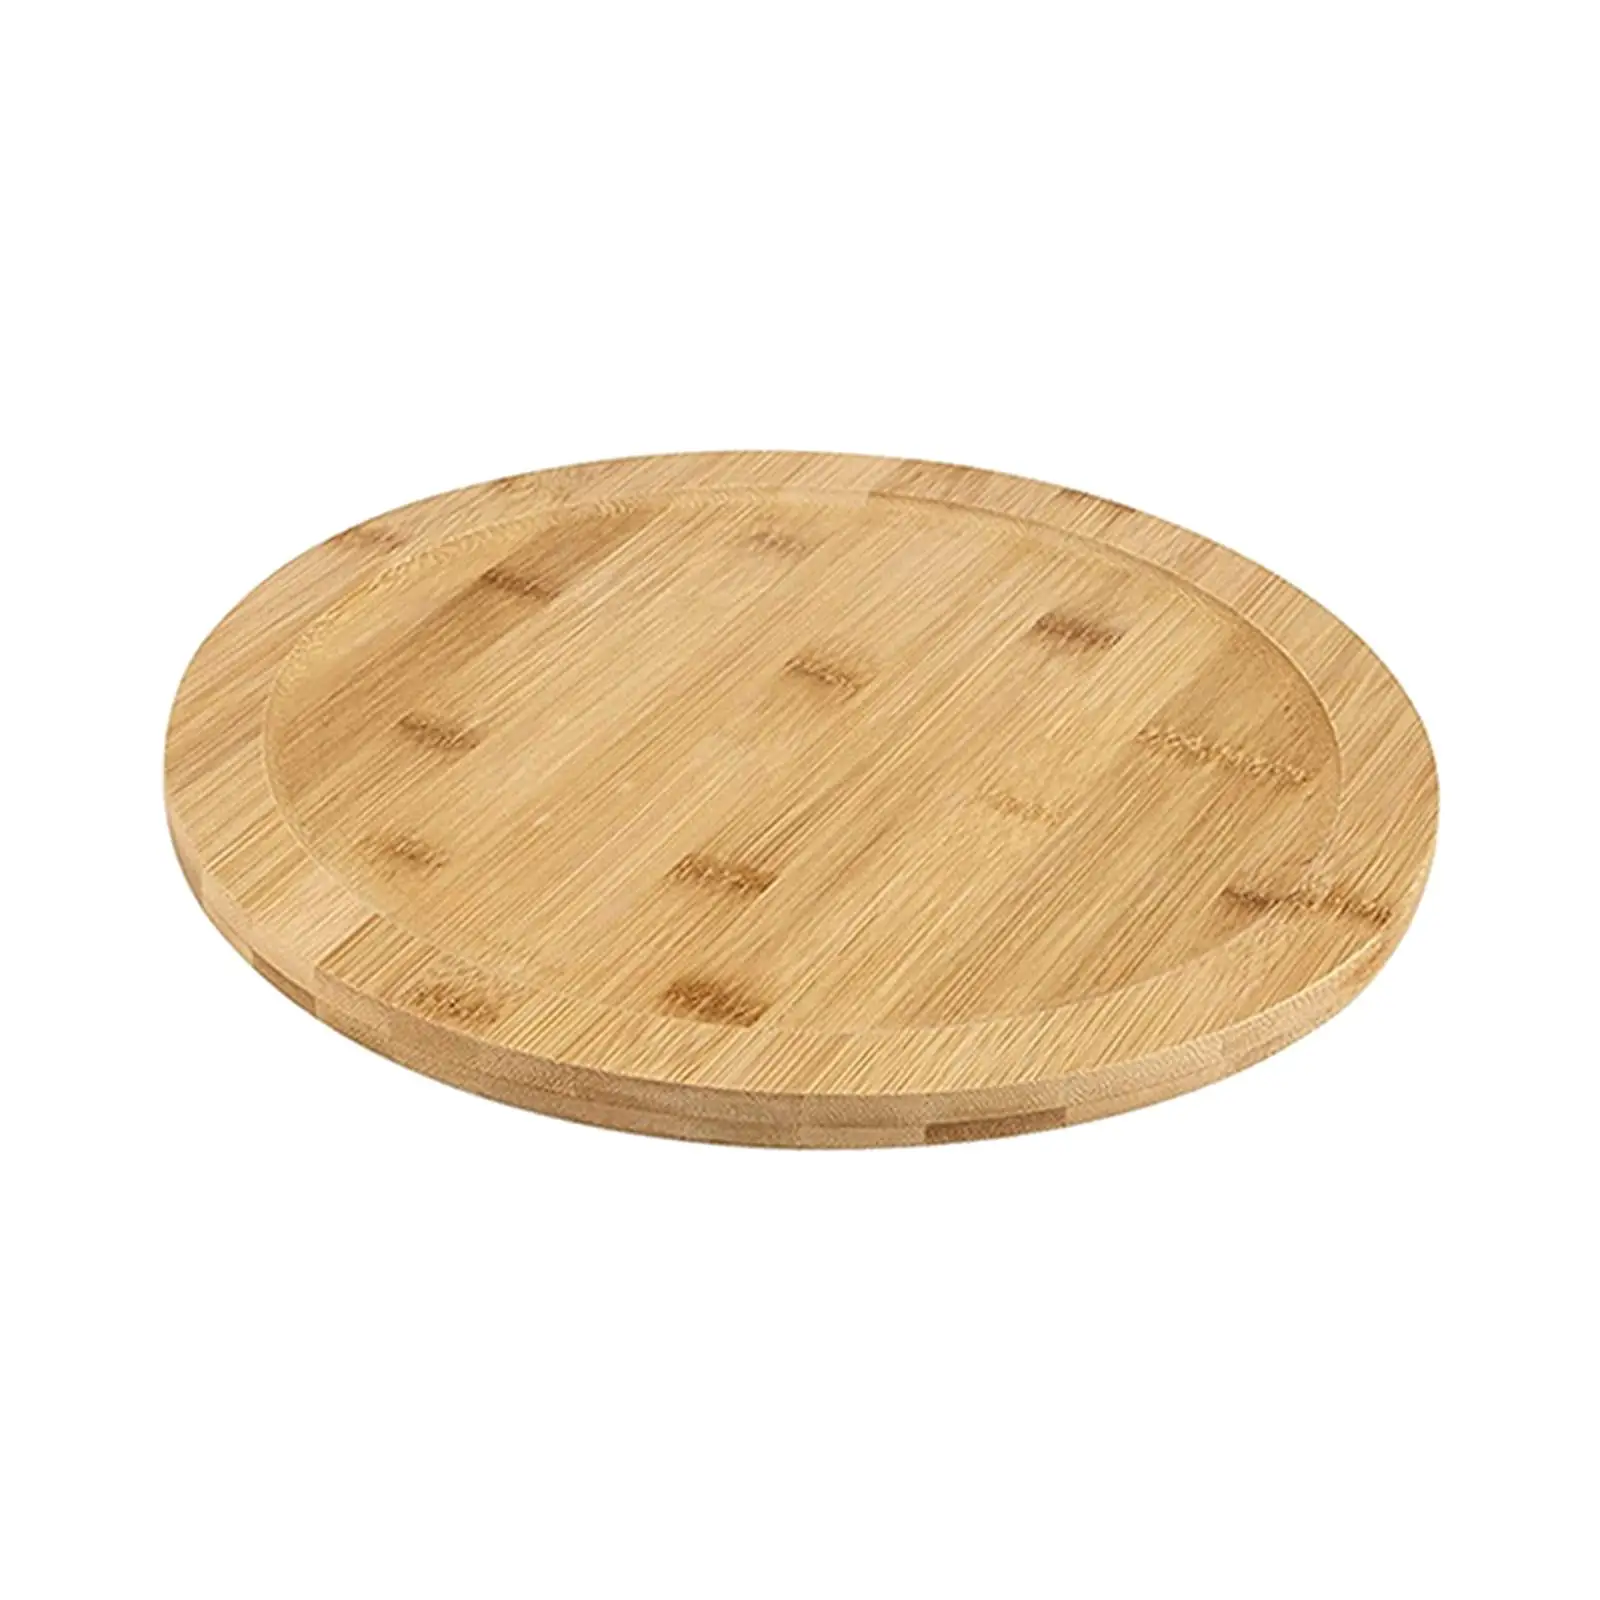 Rotating Wooden Tray Serving Tray Pizza Serving Board Rotating Board Wooden Turntable for Cabinet Kitchen Countertop Pantry Home